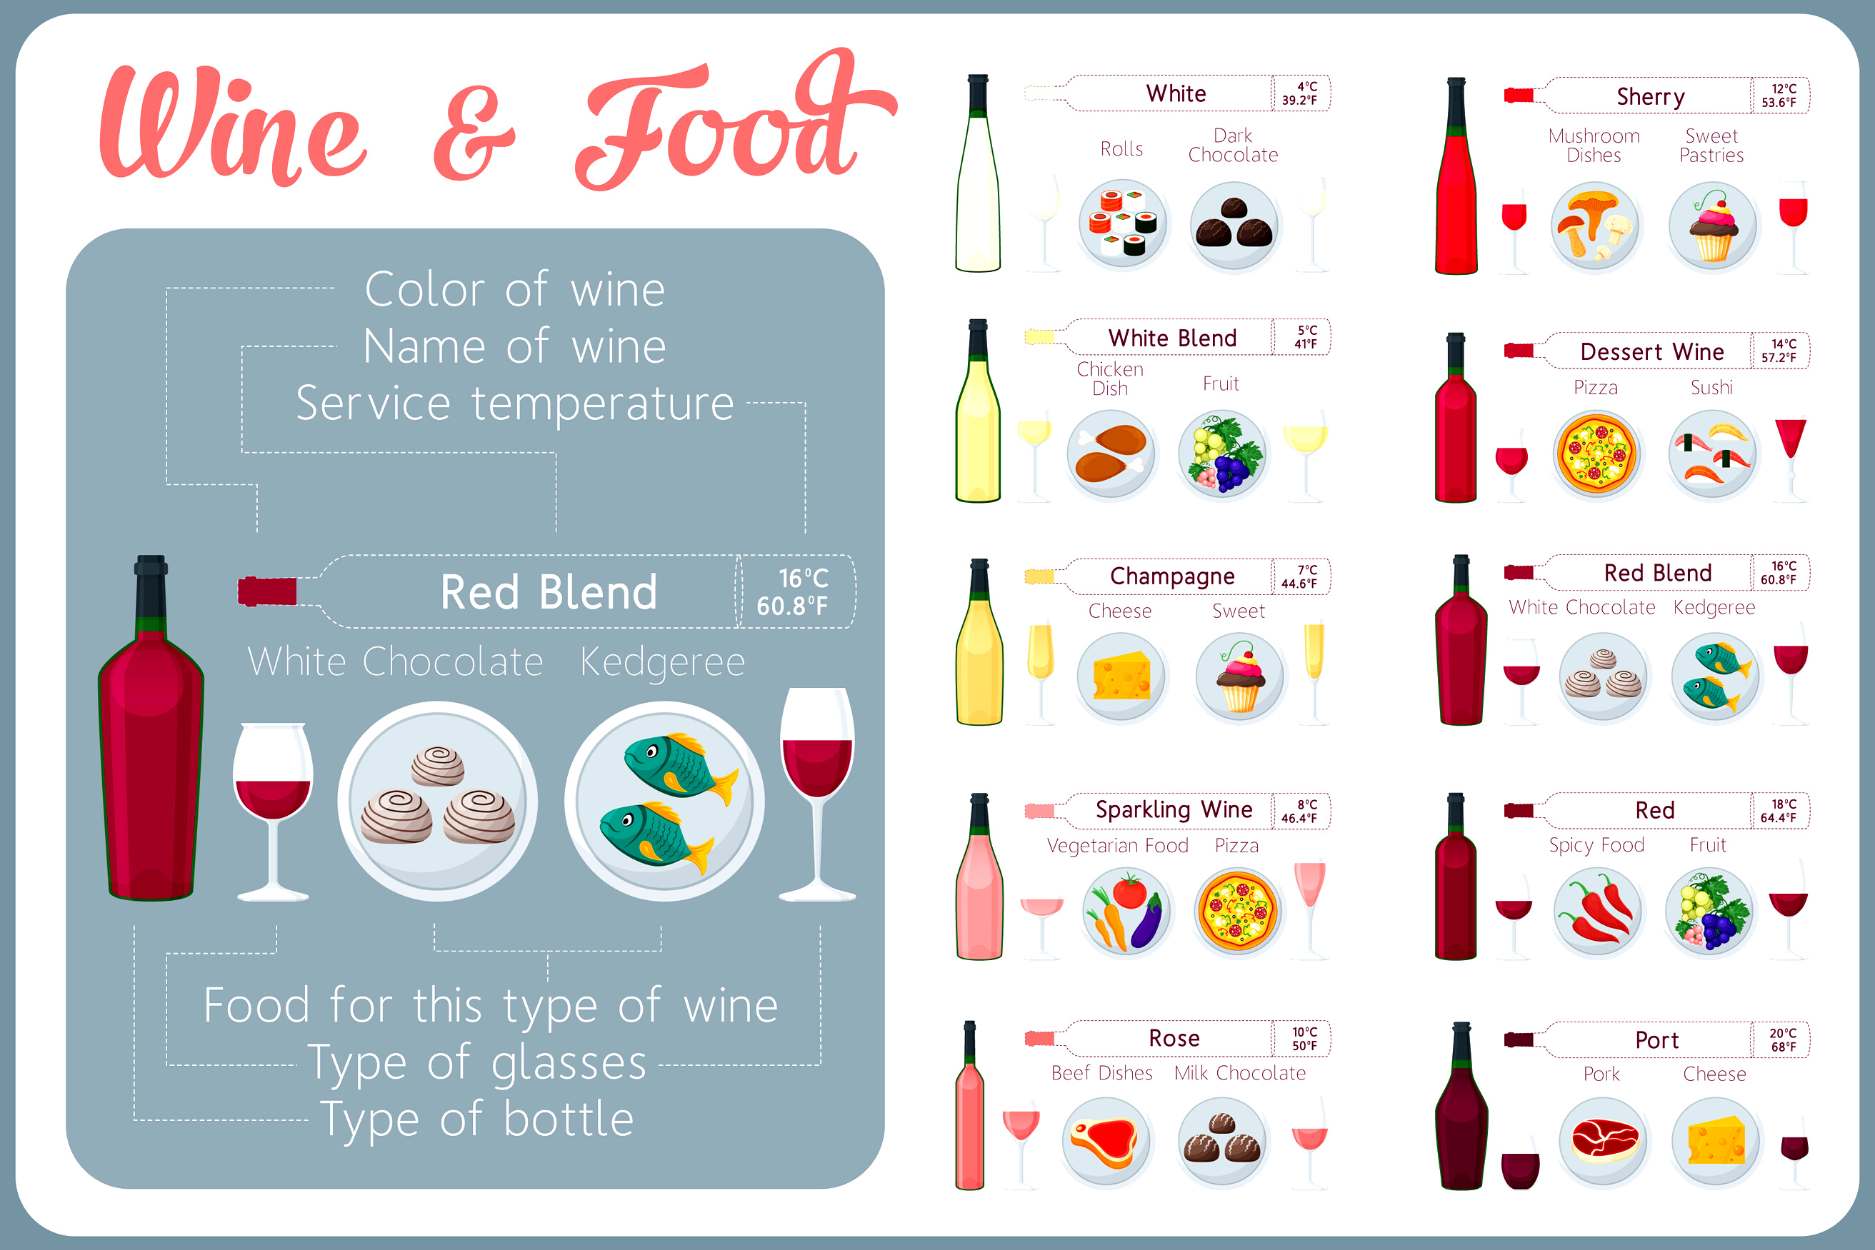 Beginner’s Guide to Food & Wine Pairing: Simple Rules To Follow